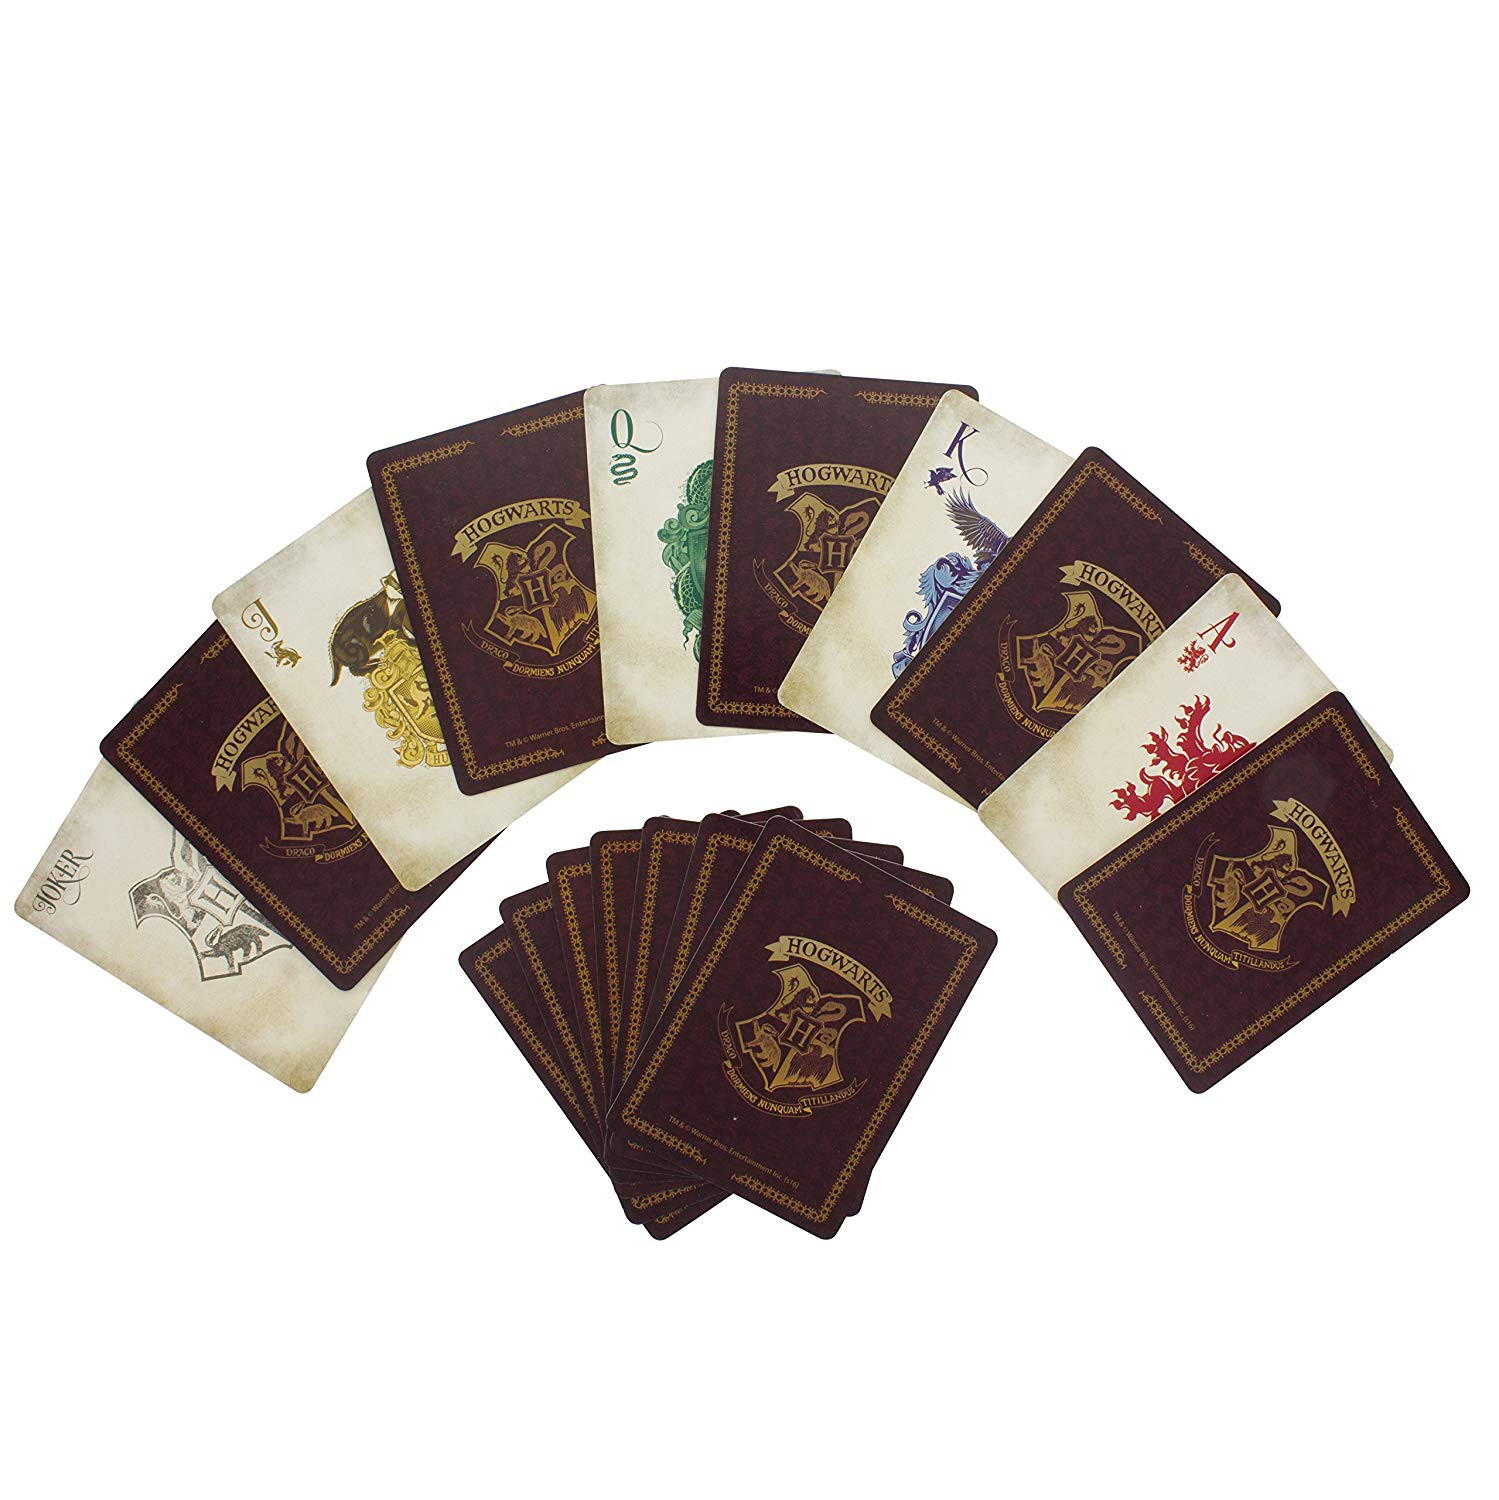 HARRY POTTER - HOGWARTS - Playing Cards